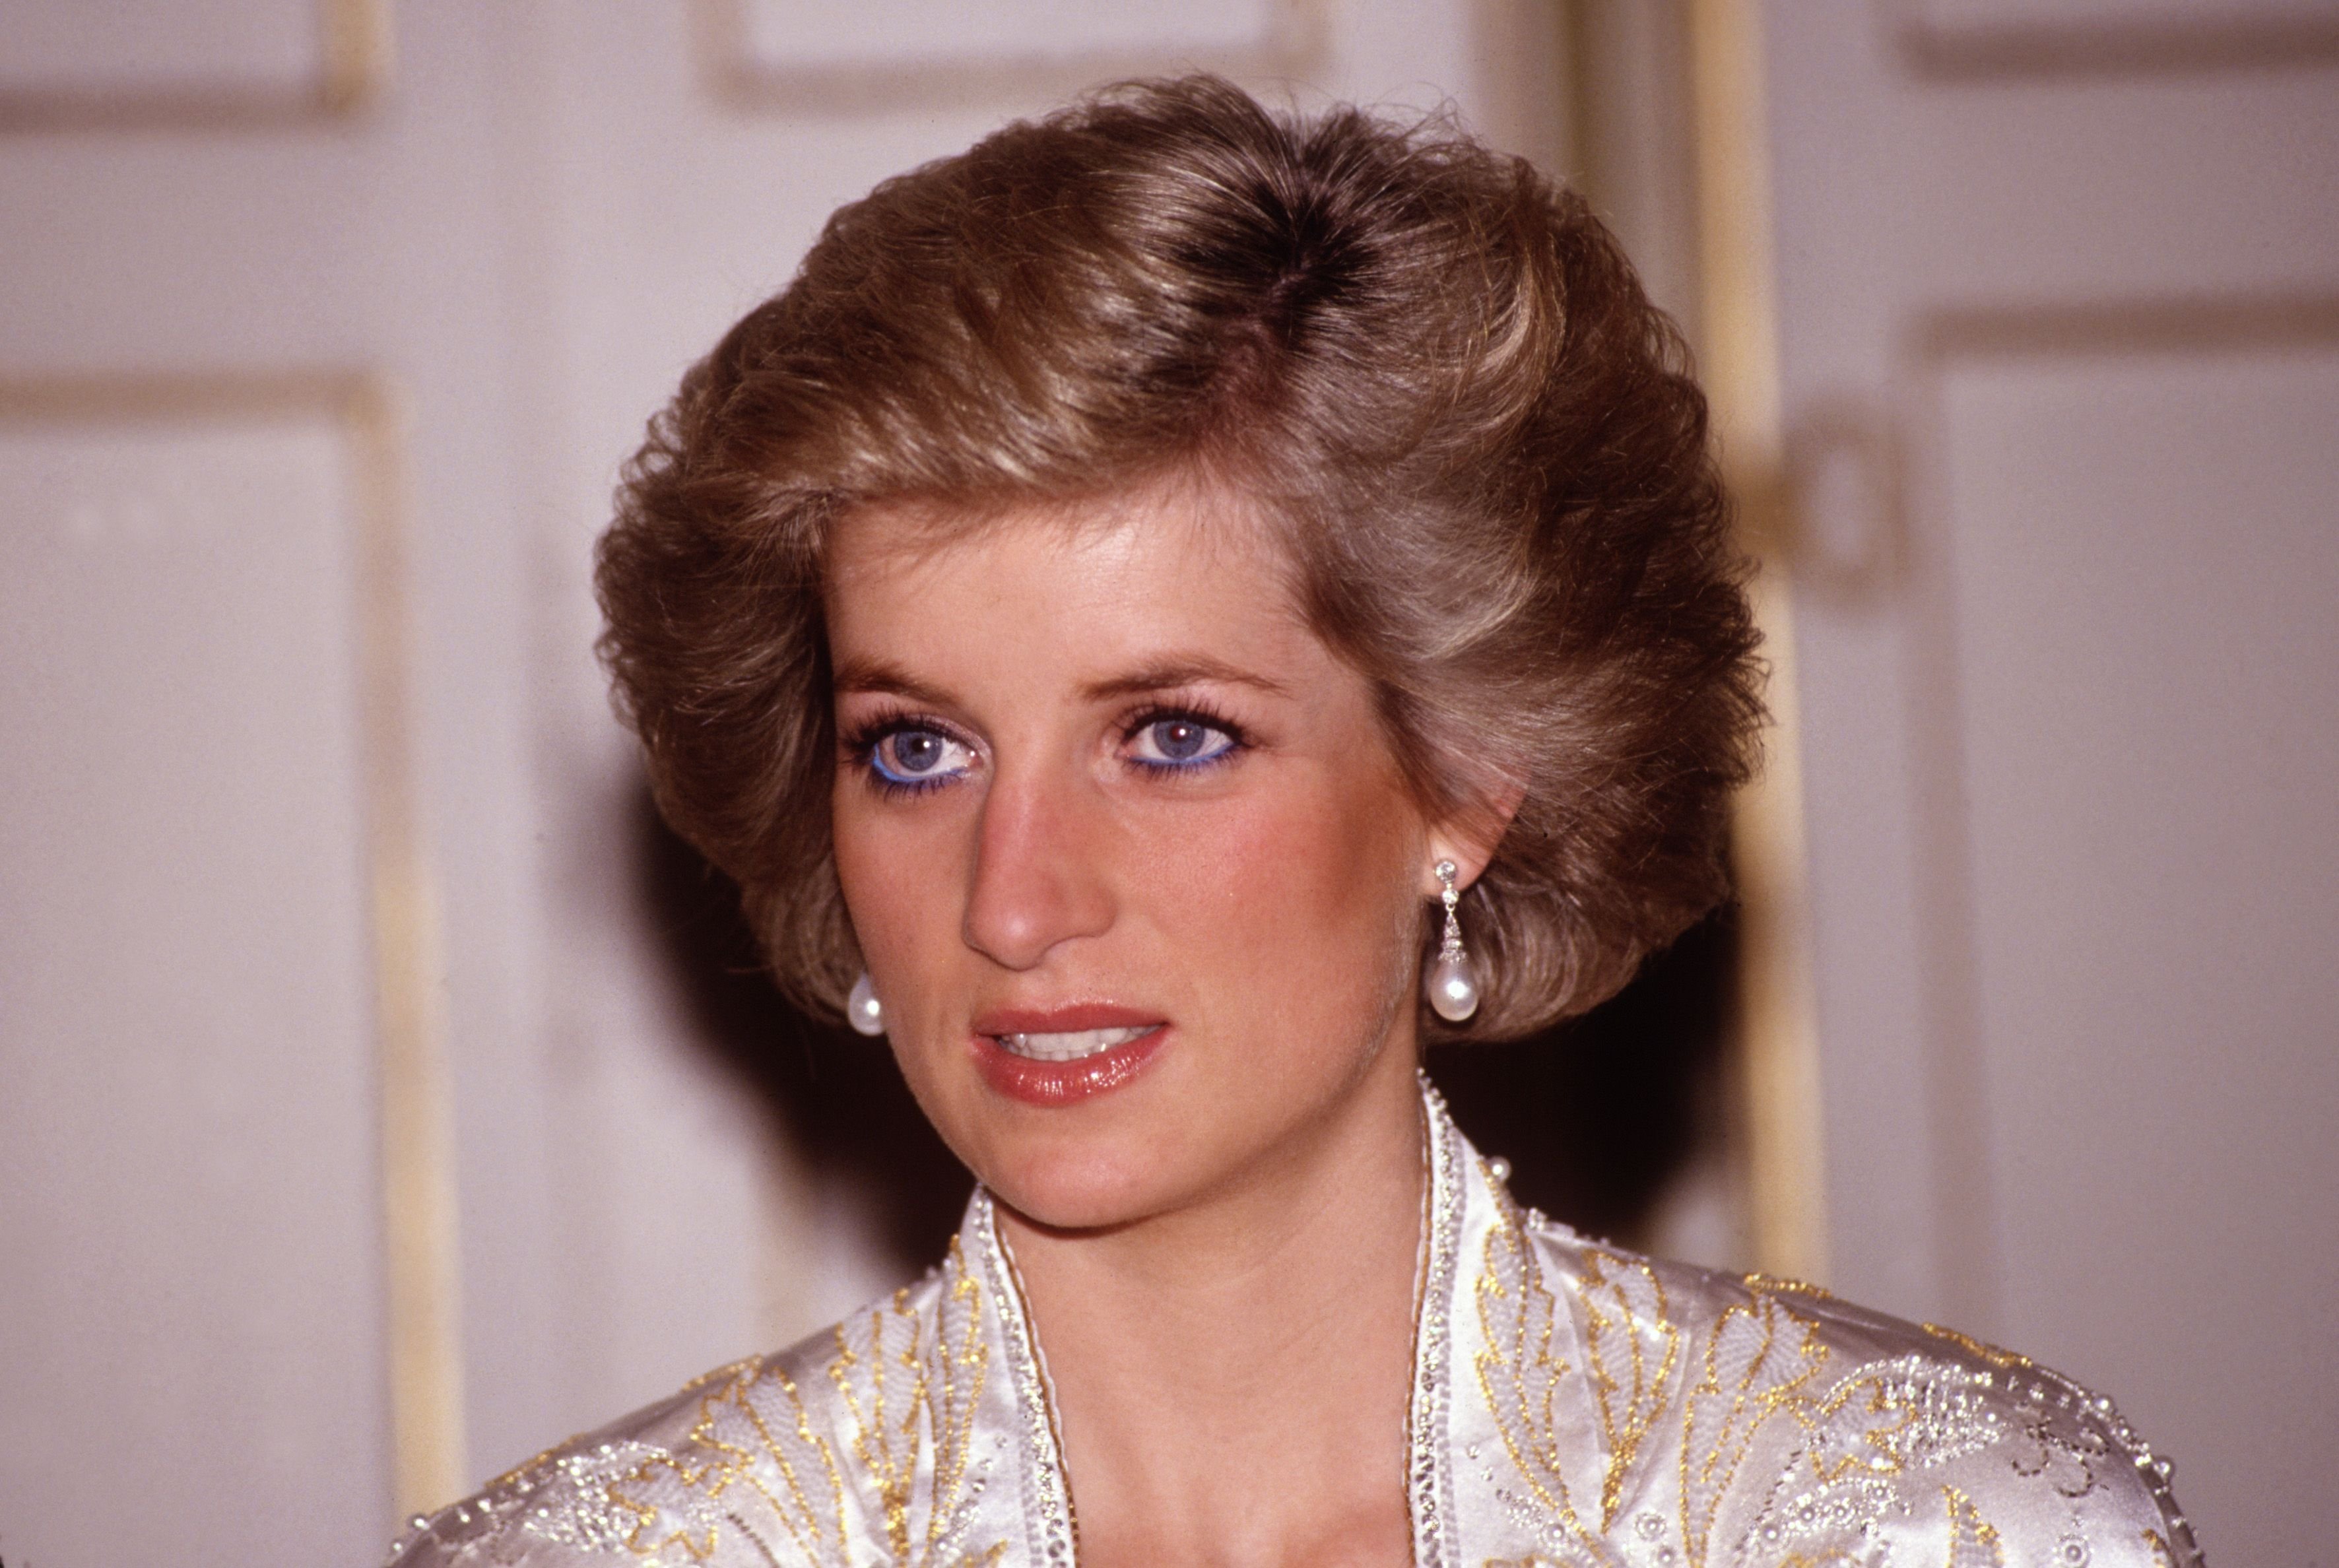 Princess Diana at a dinner given by President Mitterand at the Elysee Palace in Paris in 1988. | Photo: Getty Images